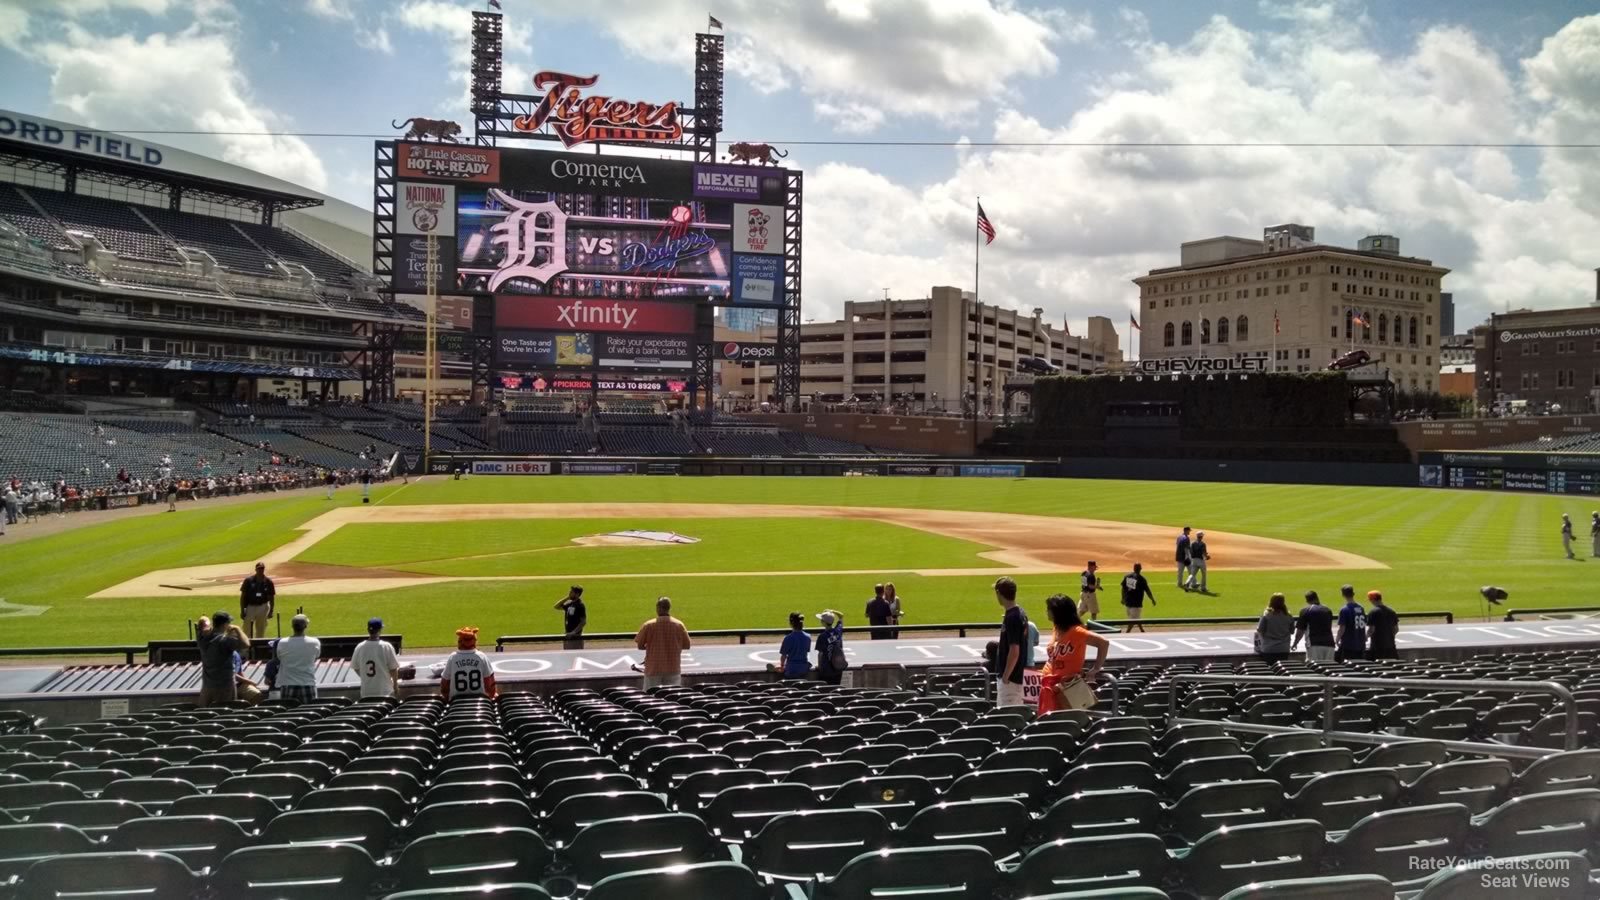 Detroit Tigers Seating Chart With Rows